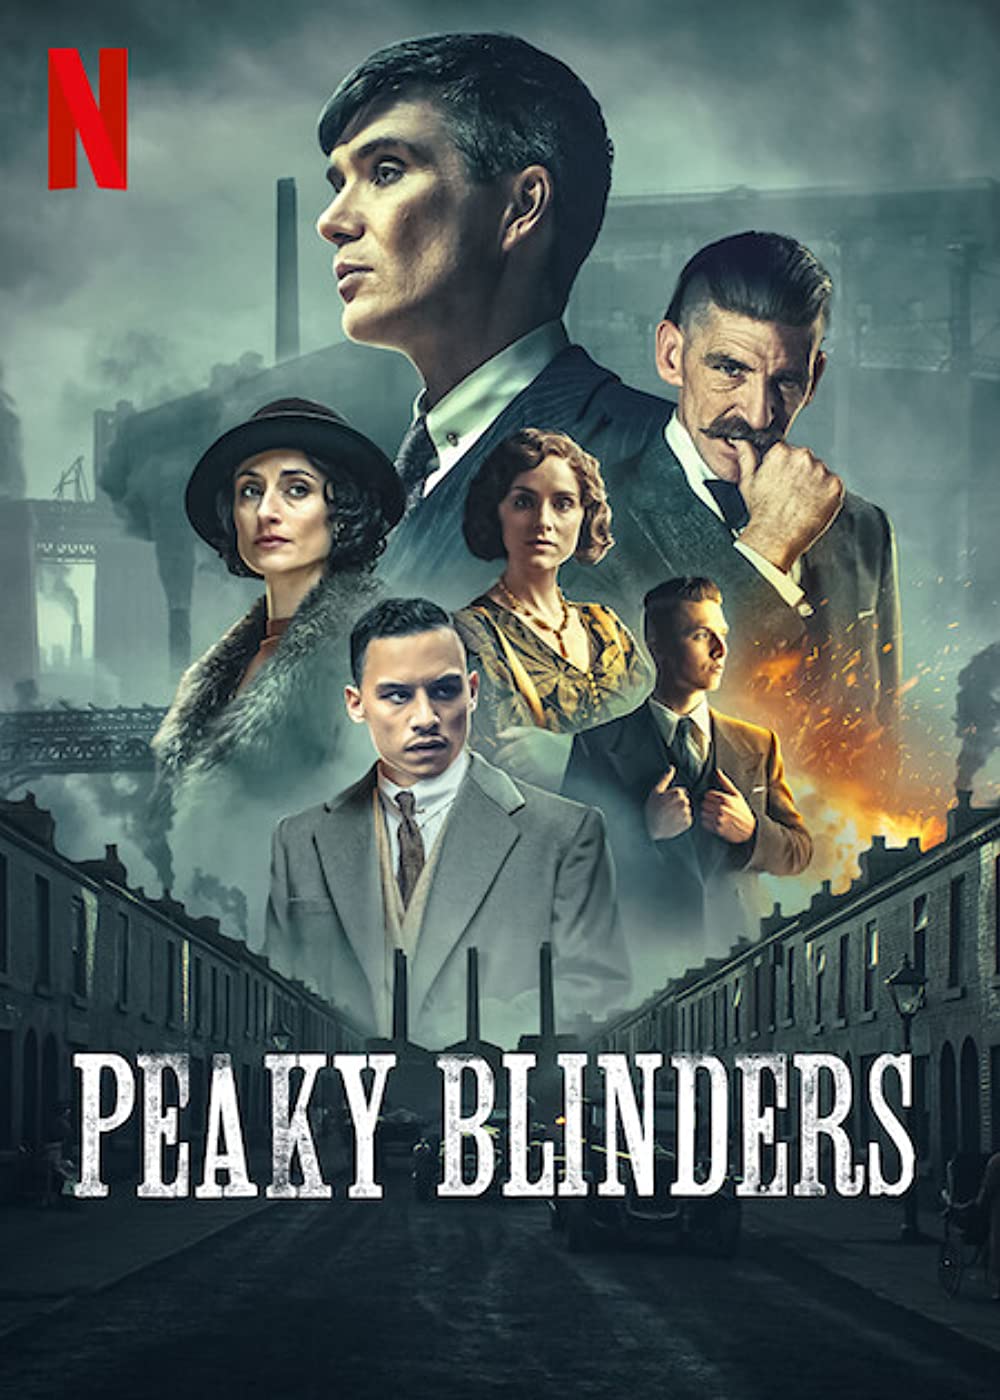 Peaky Blinders spinoff film to begin Production soon: Steven Knight